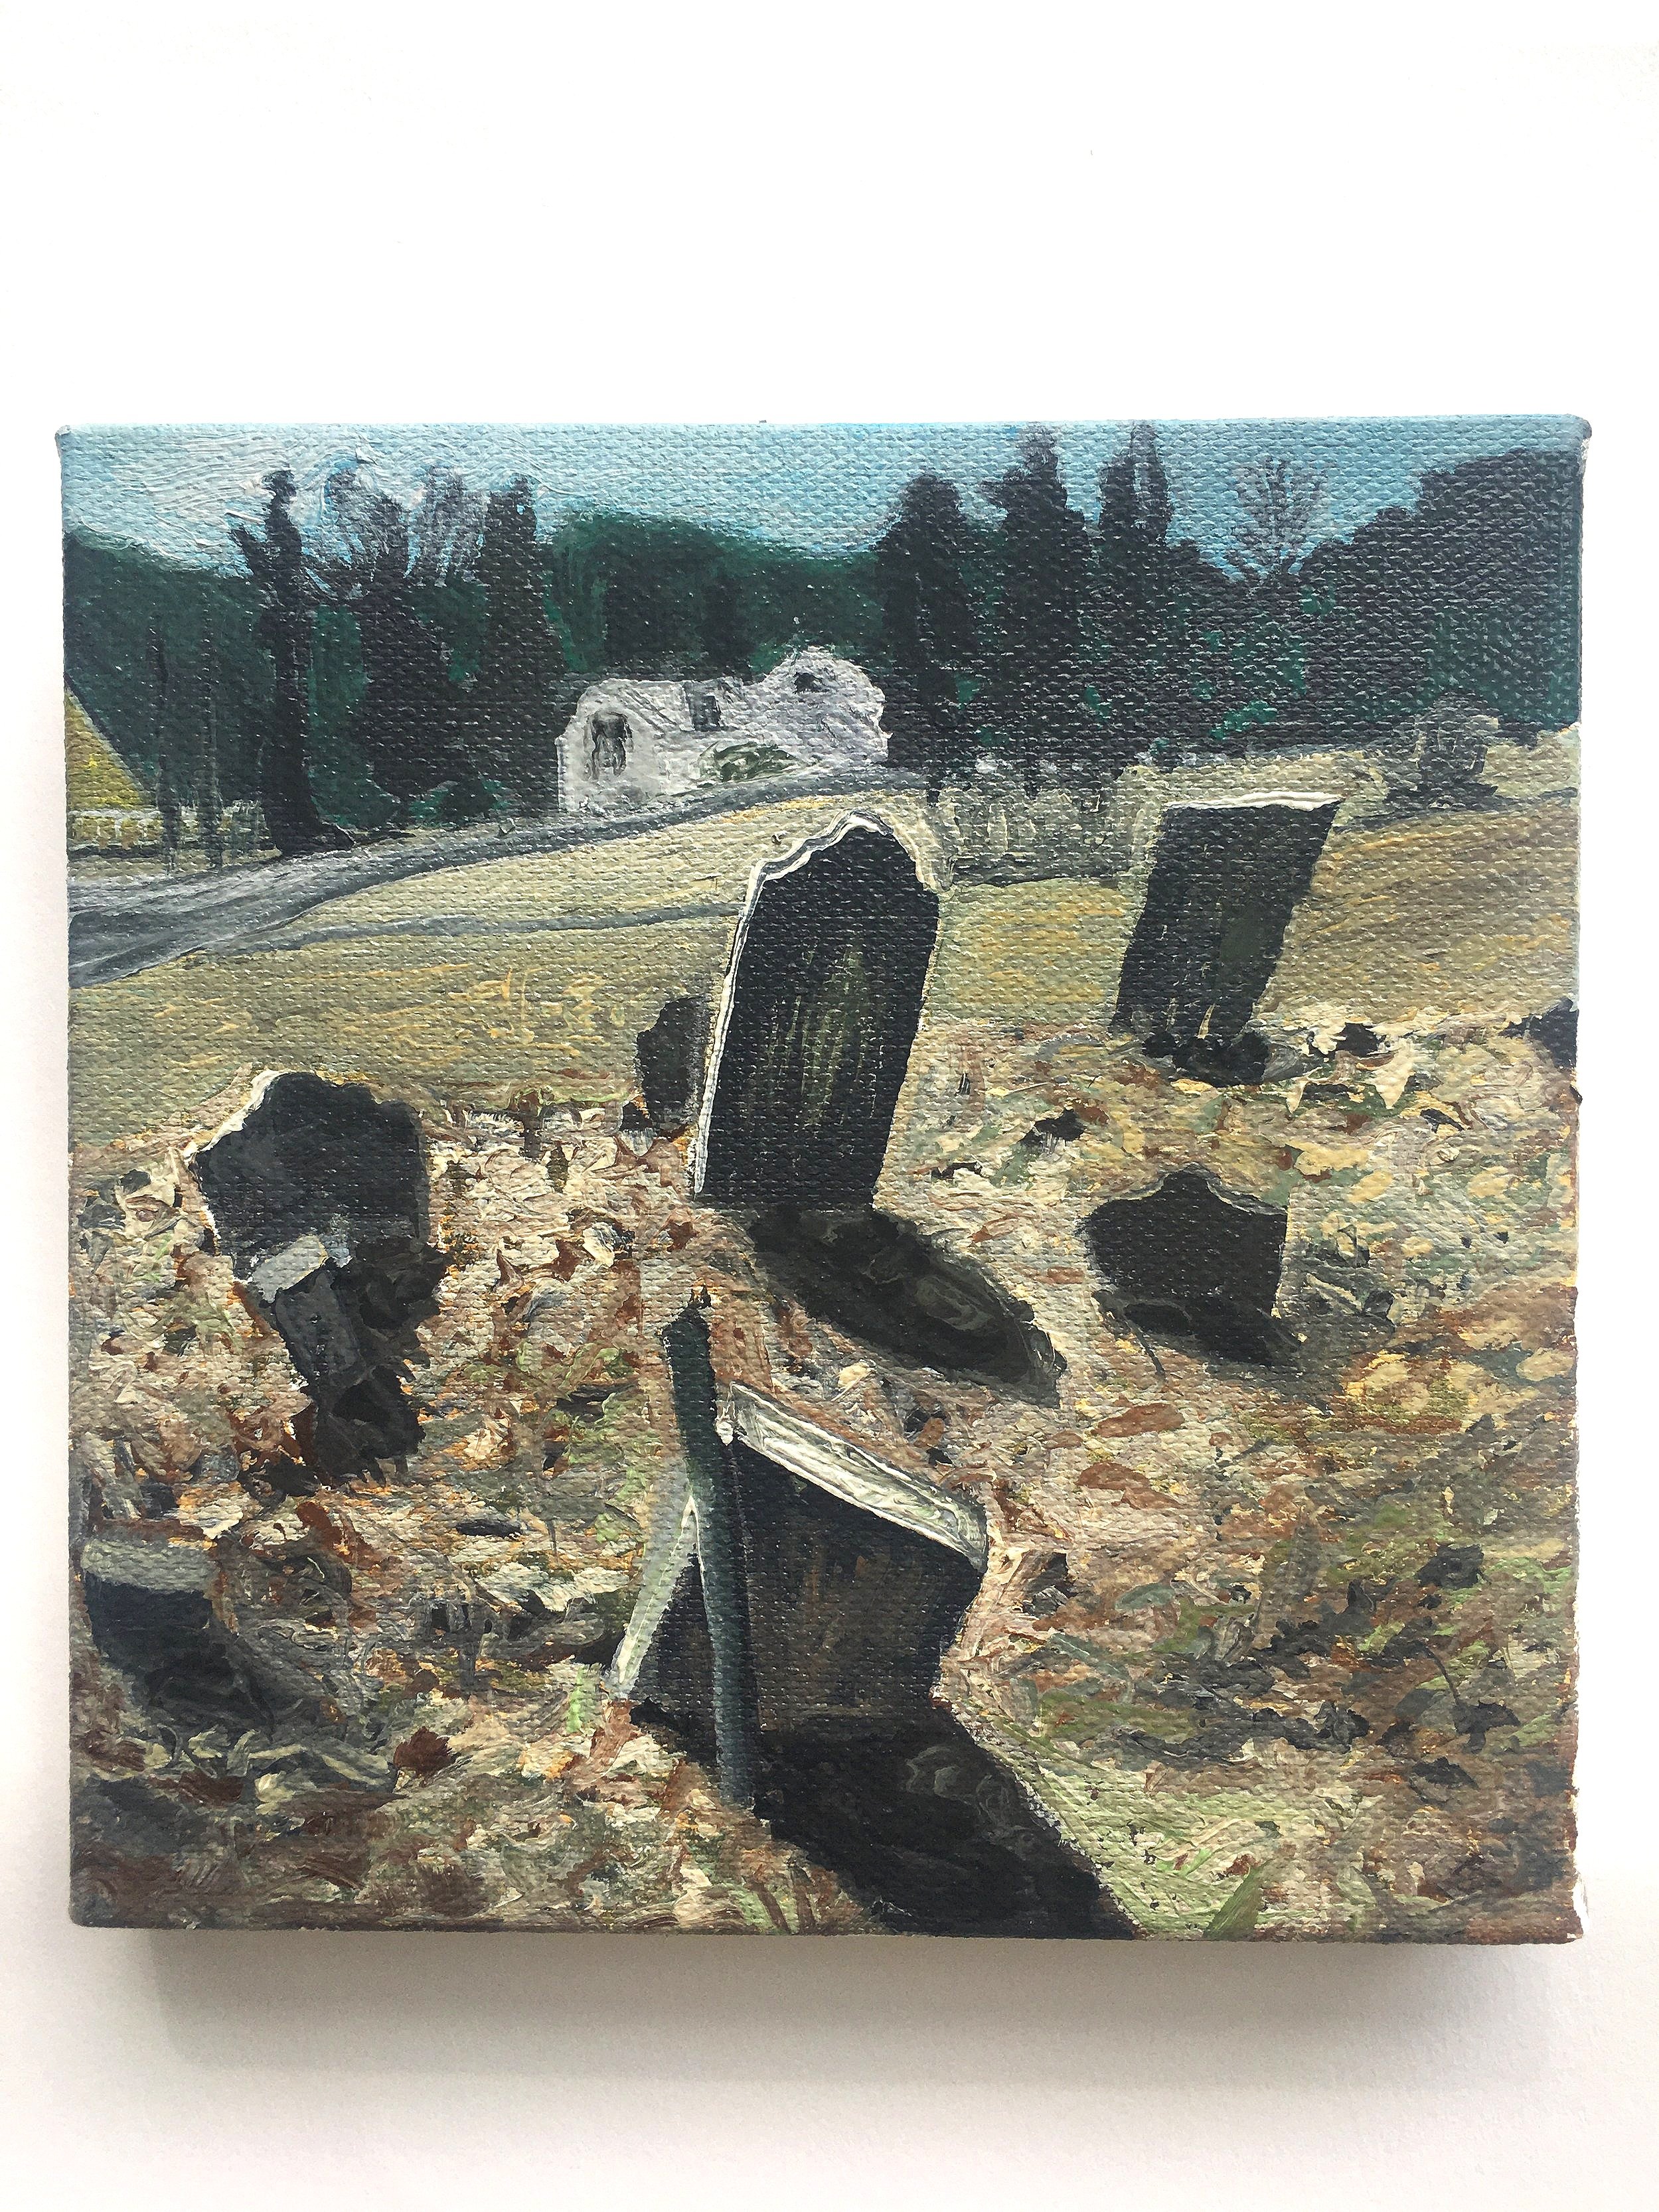   Graveyard in Early Spring,  Oil on Canvas, 6” x 6”, 2021 